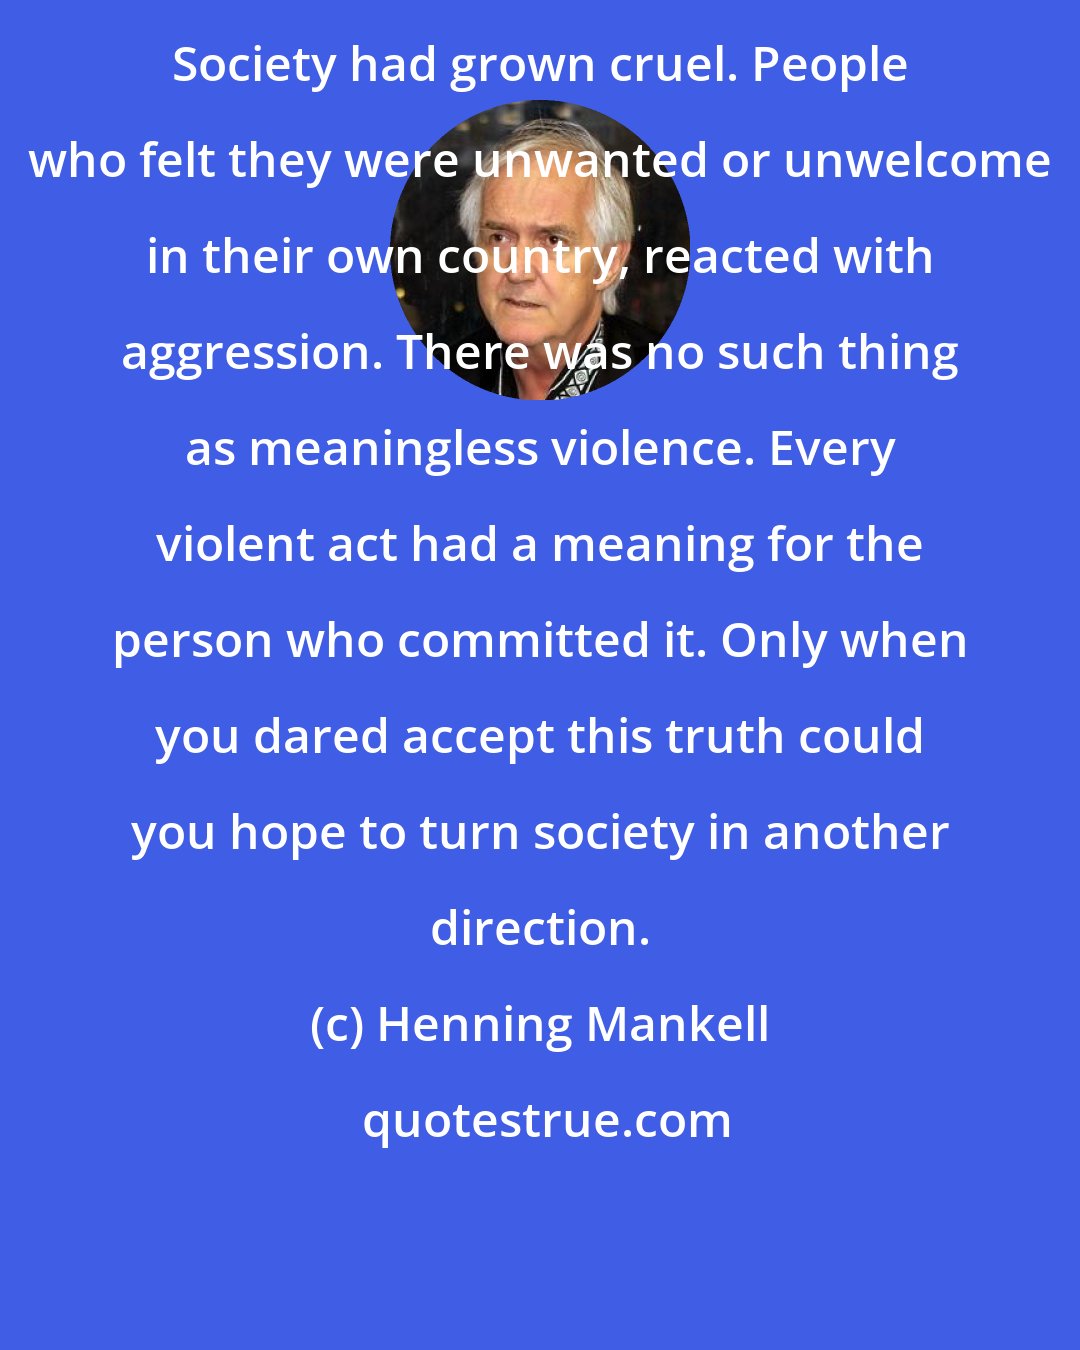 Henning Mankell: Society had grown cruel. People who felt they were unwanted or unwelcome in their own country, reacted with aggression. There was no such thing as meaningless violence. Every violent act had a meaning for the person who committed it. Only when you dared accept this truth could you hope to turn society in another direction.